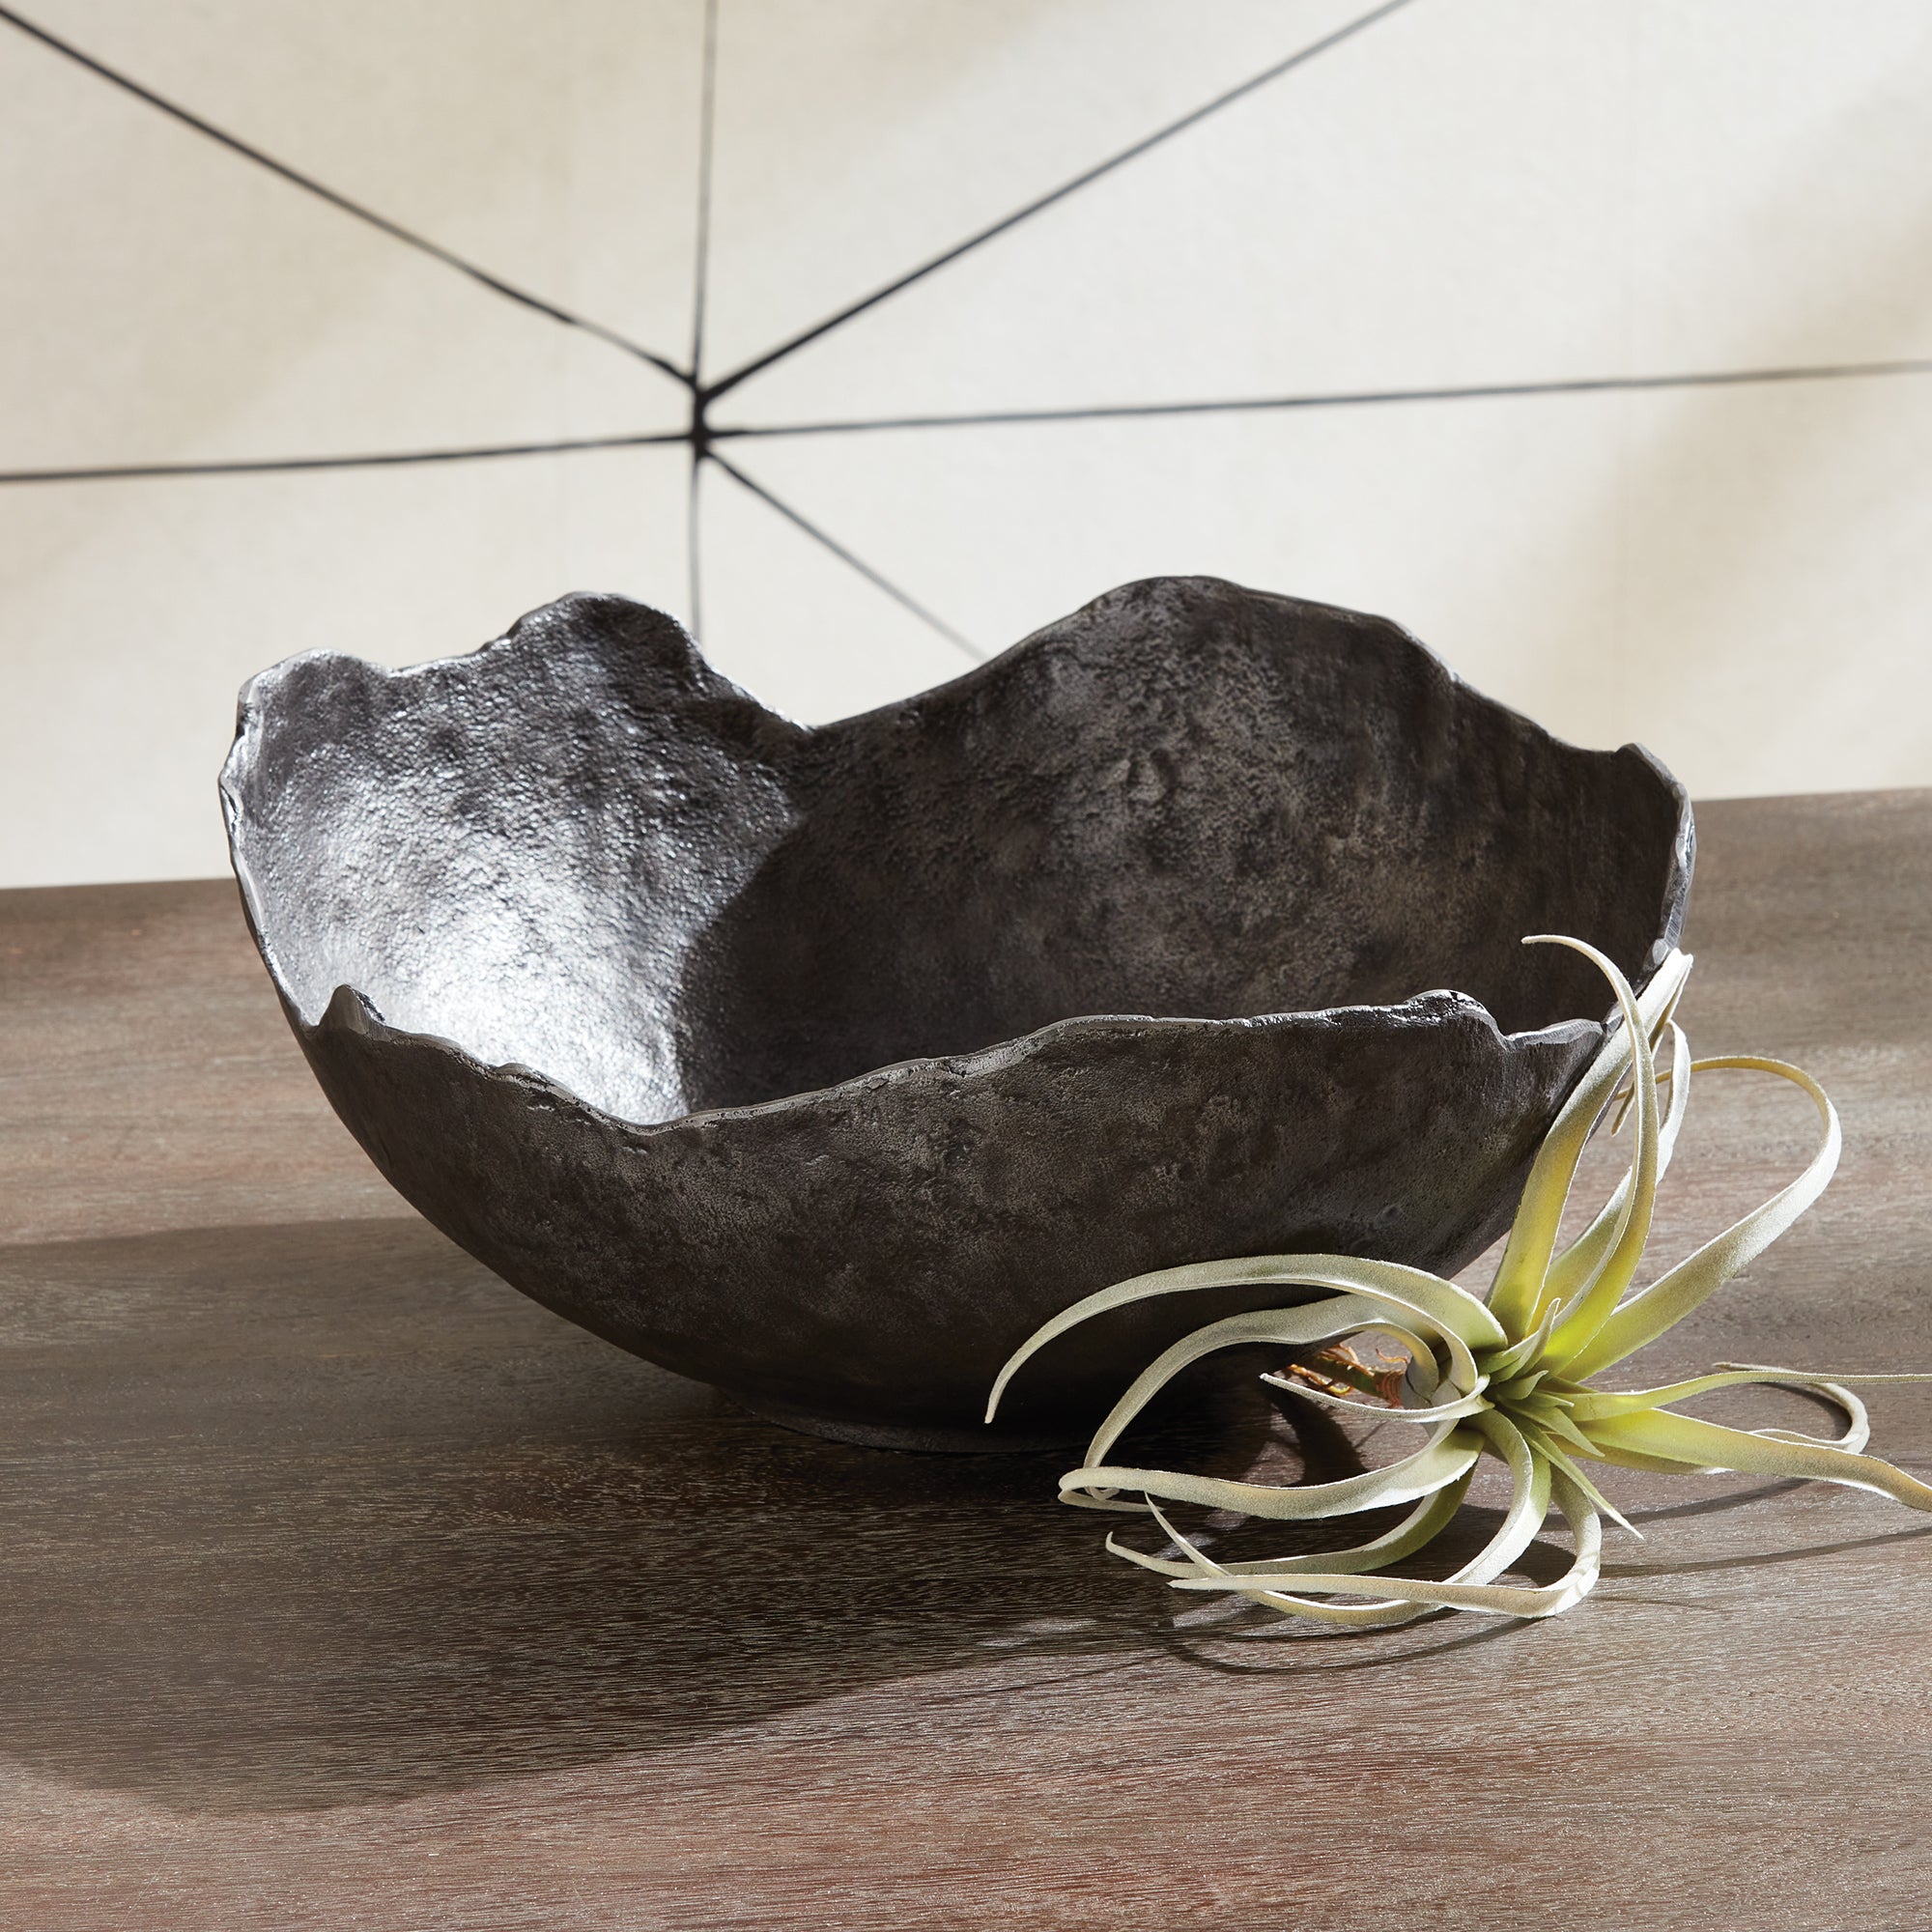 This decorative hand-sculpted bowl is made to be on display. With an oil-rubbed bronze finish and irregular edge, styled or just as it is, a strong statement for the modern space. The epitome of functional art. Amethyst Home provides interior design, new construction, custom furniture, and area rugs in the Boston metro area.